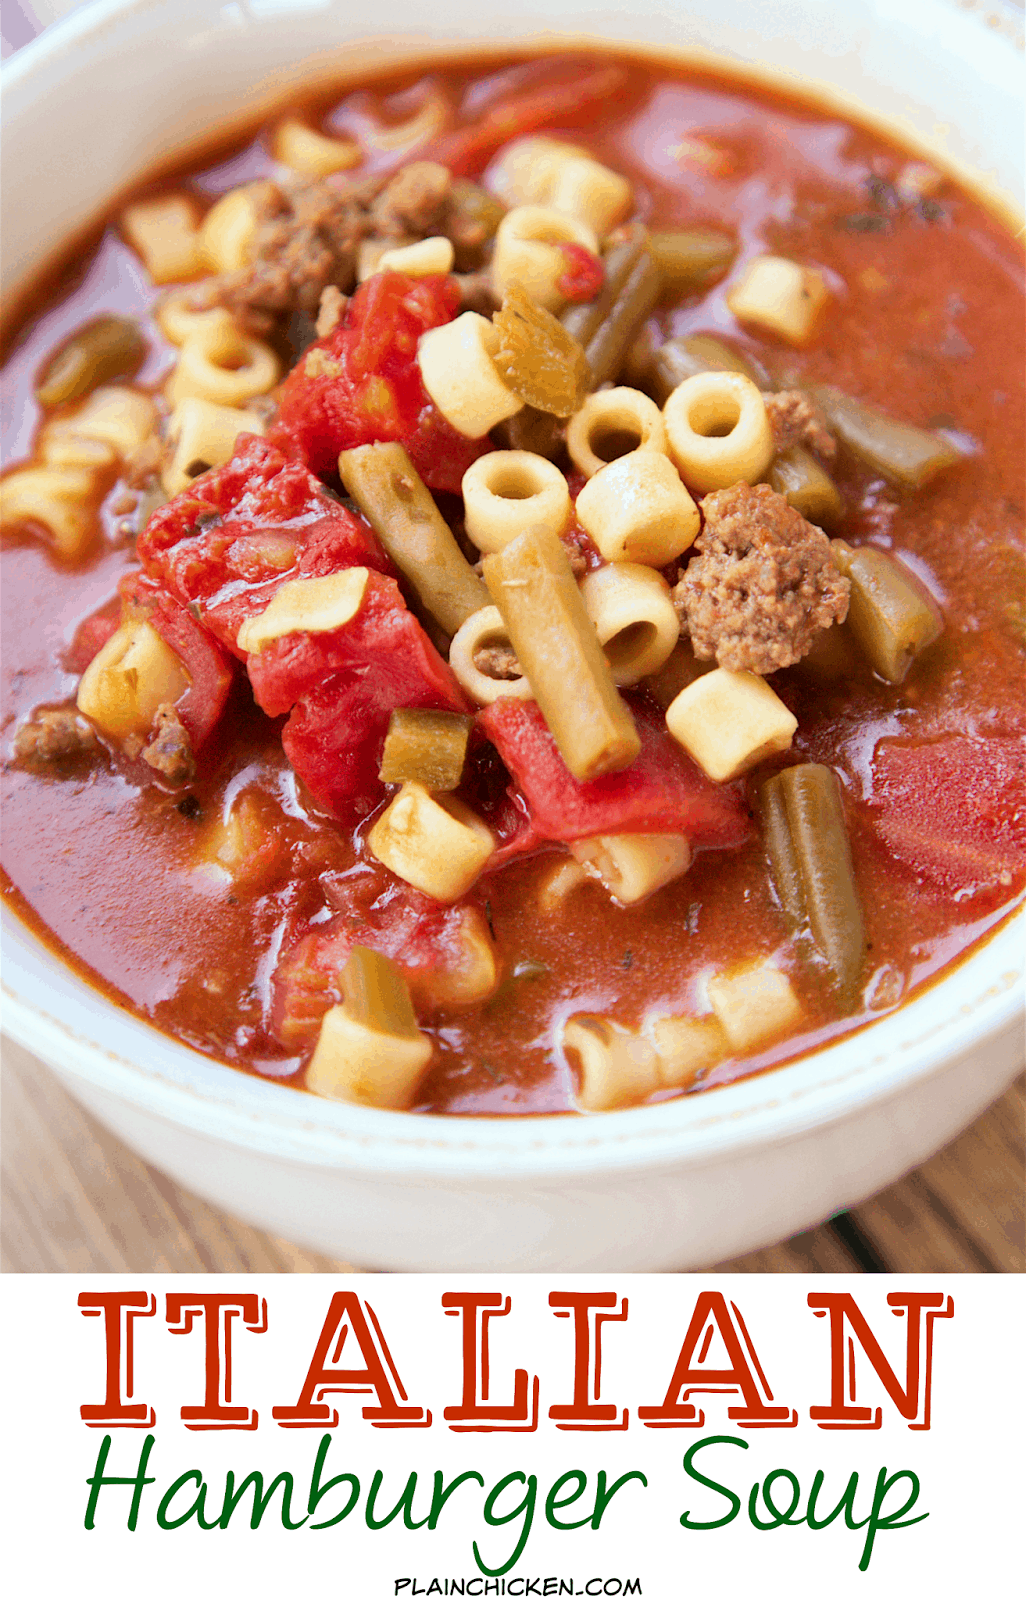 Italian Hamburger Soup - ground beef, peppers, stewed tomatoes, green beans, tomato sauce, oregano, basil and pasta - SO good! We ate this two days in a row. Makes a ton - freezes well. 